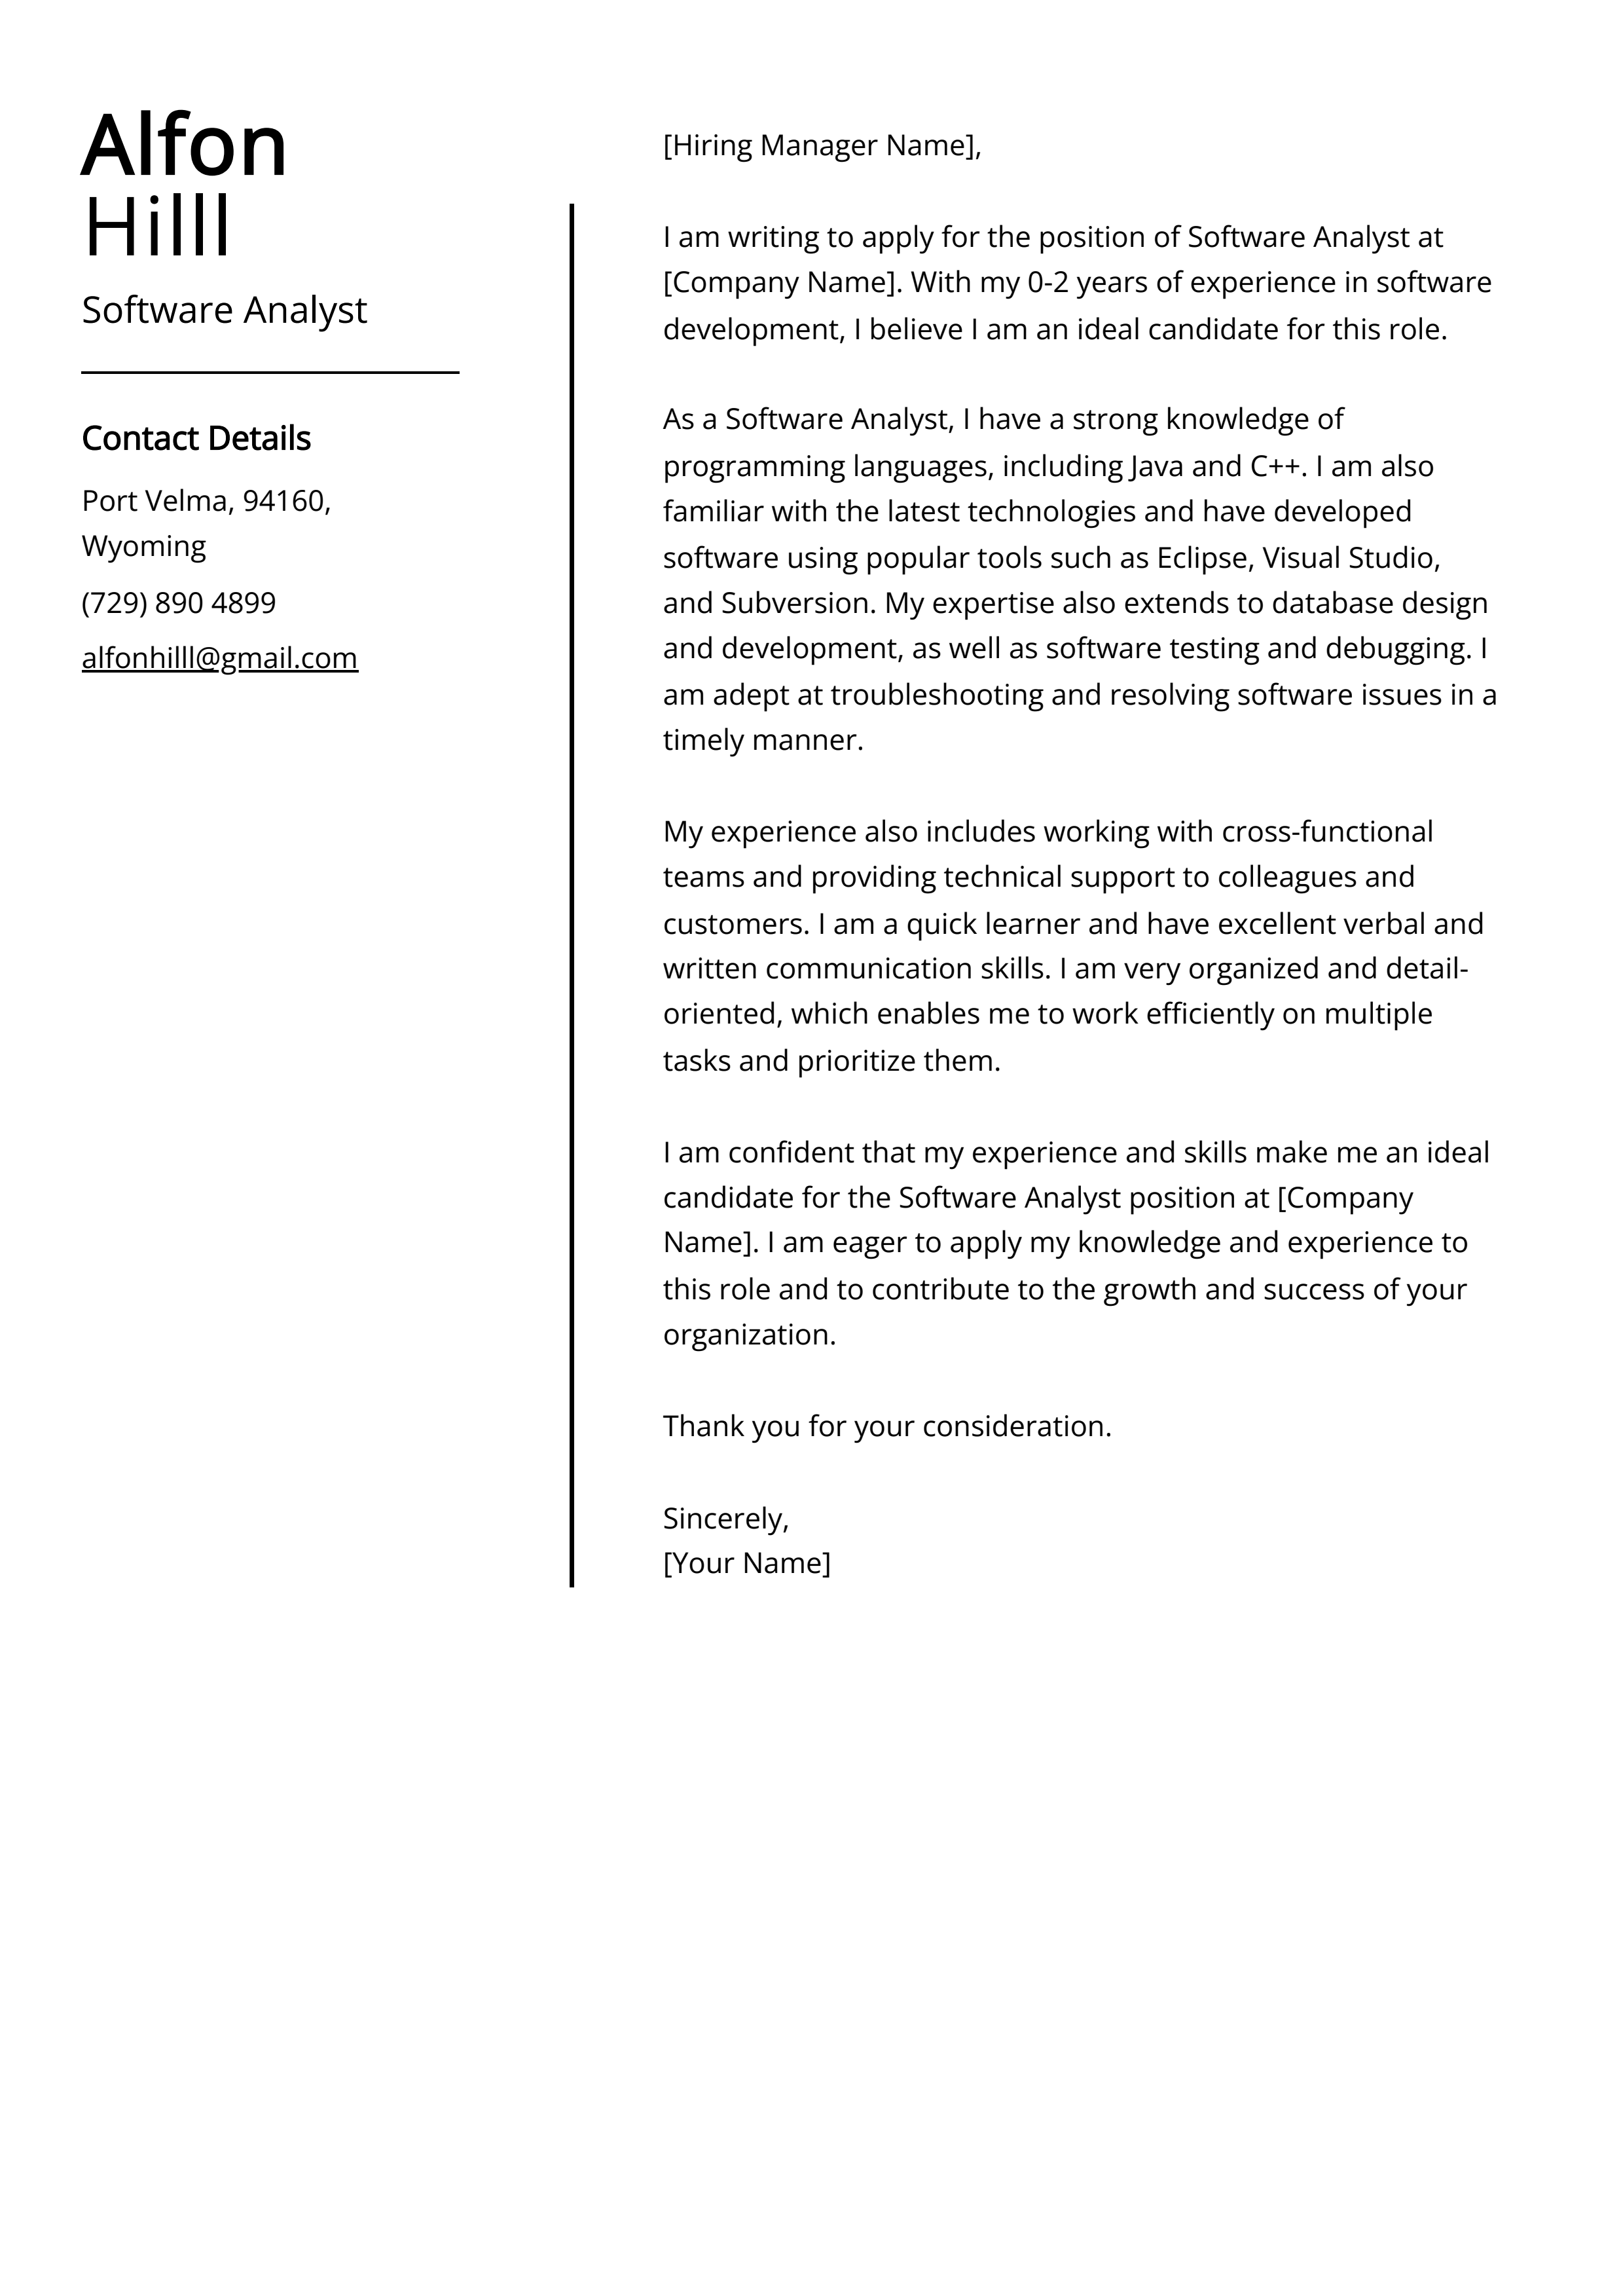 Software Analyst Cover Letter Example